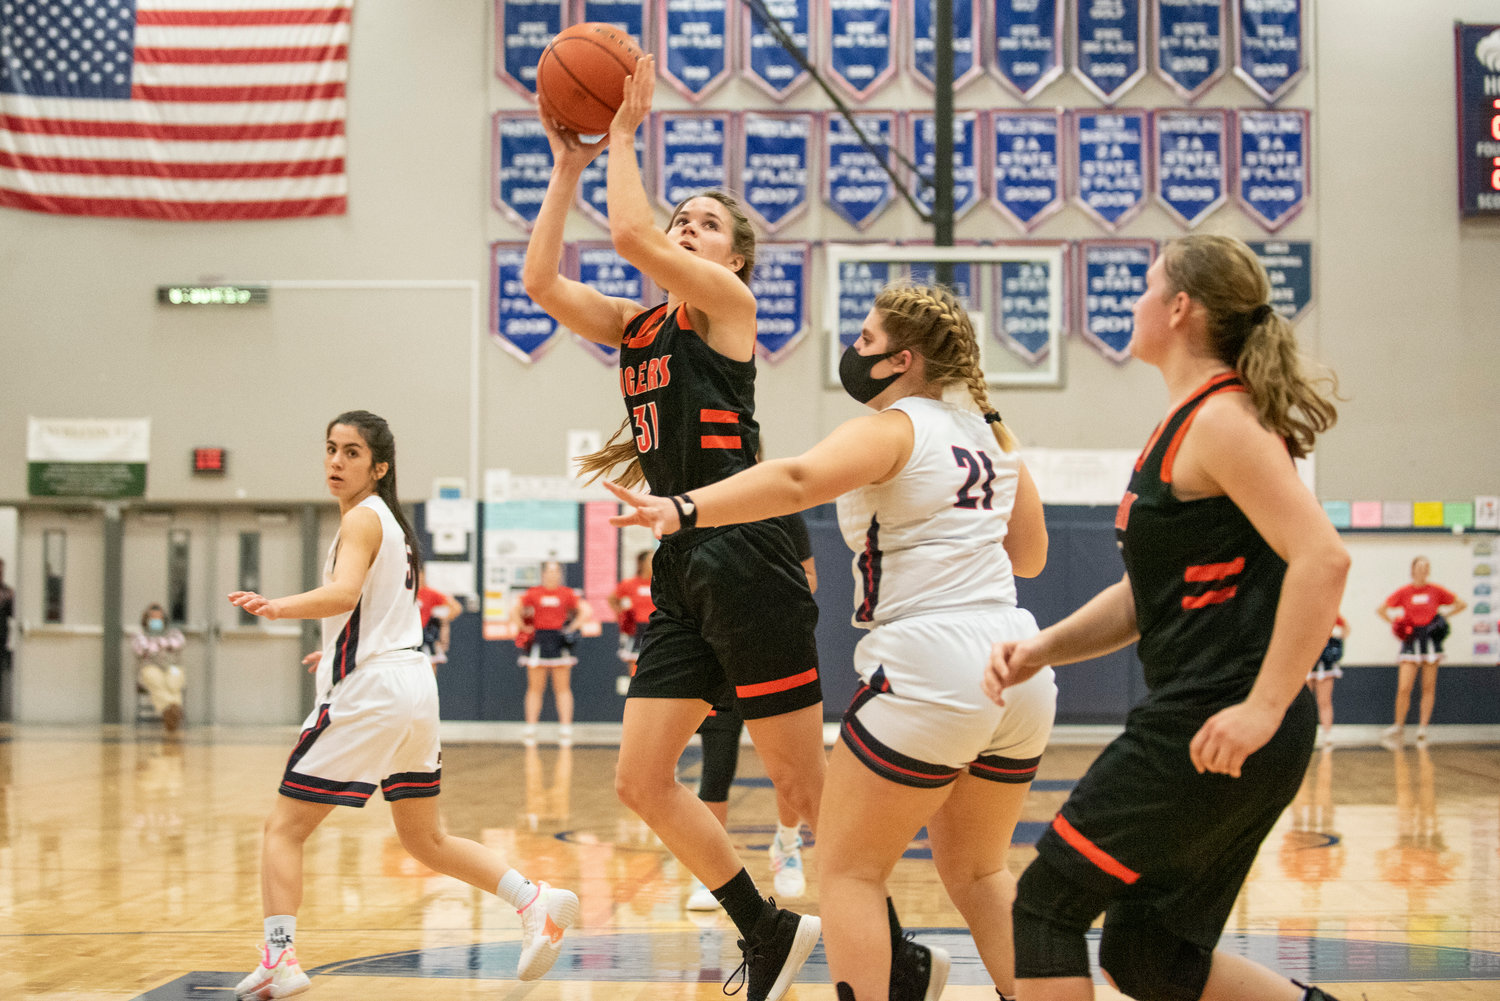 Centralia's Maddie Corwin (31) drives for a shot against Black Hills on Dec. 17.